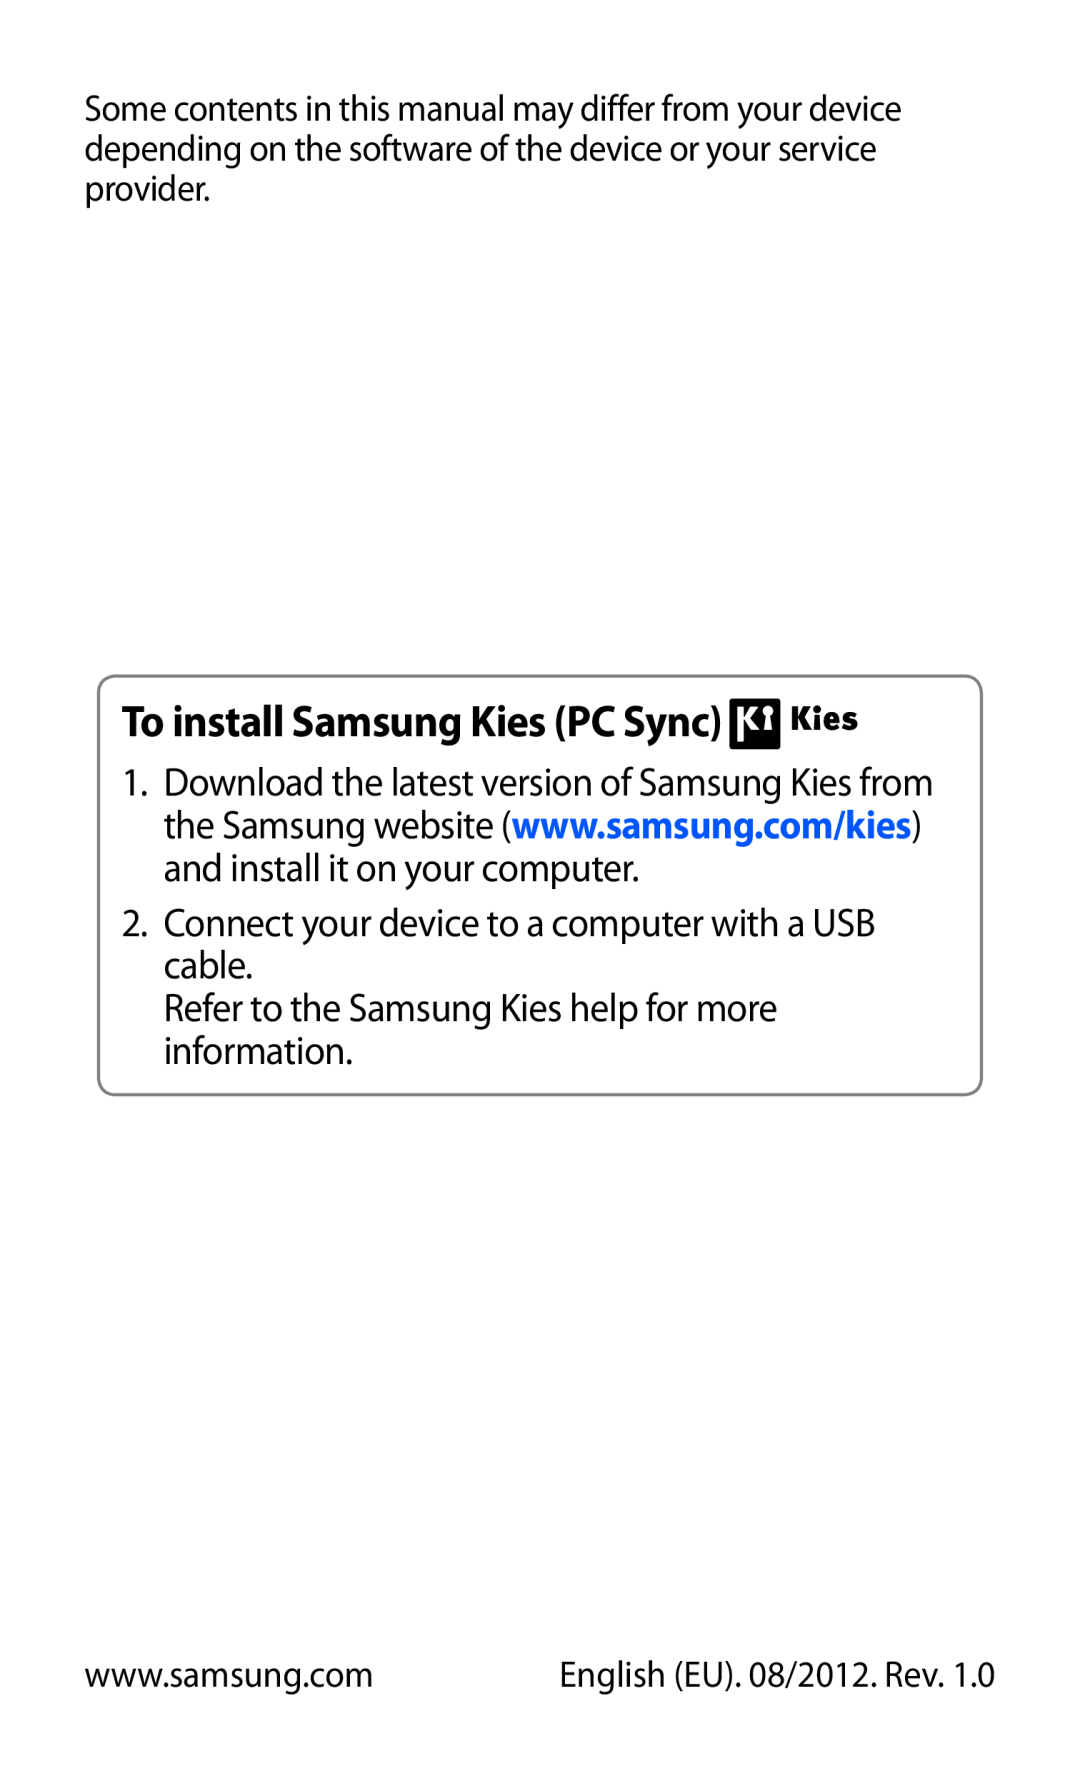 Samsung GT-P7500FKACYV, GT-P7500UWEDBT To install Samsung Kies PC Sync, Connect your device to a computer with a USB cable 